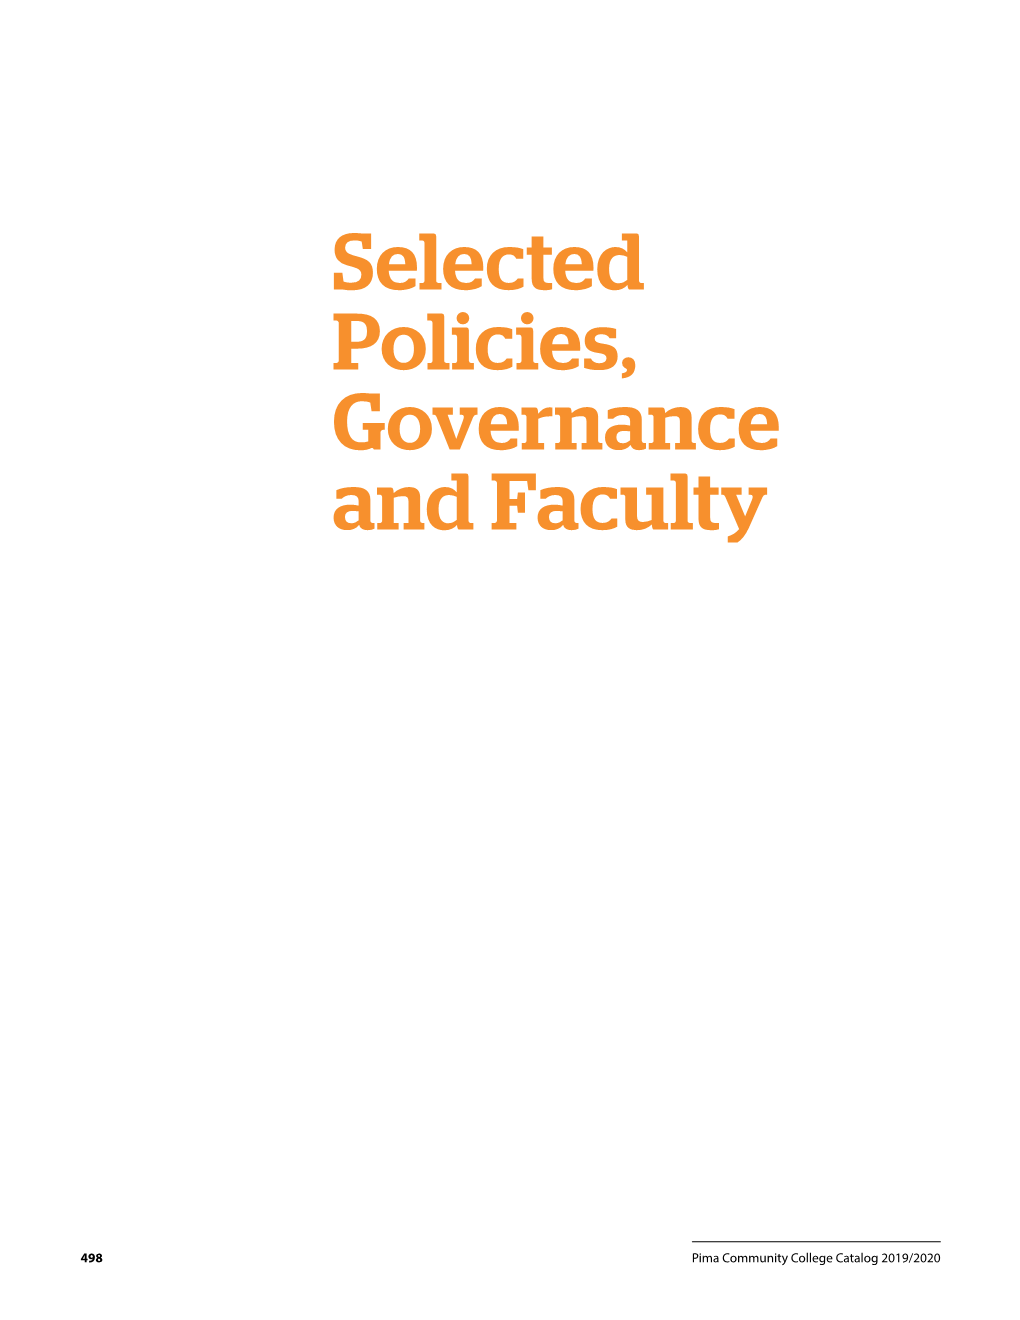 Selected Policies, Governance and Faculty